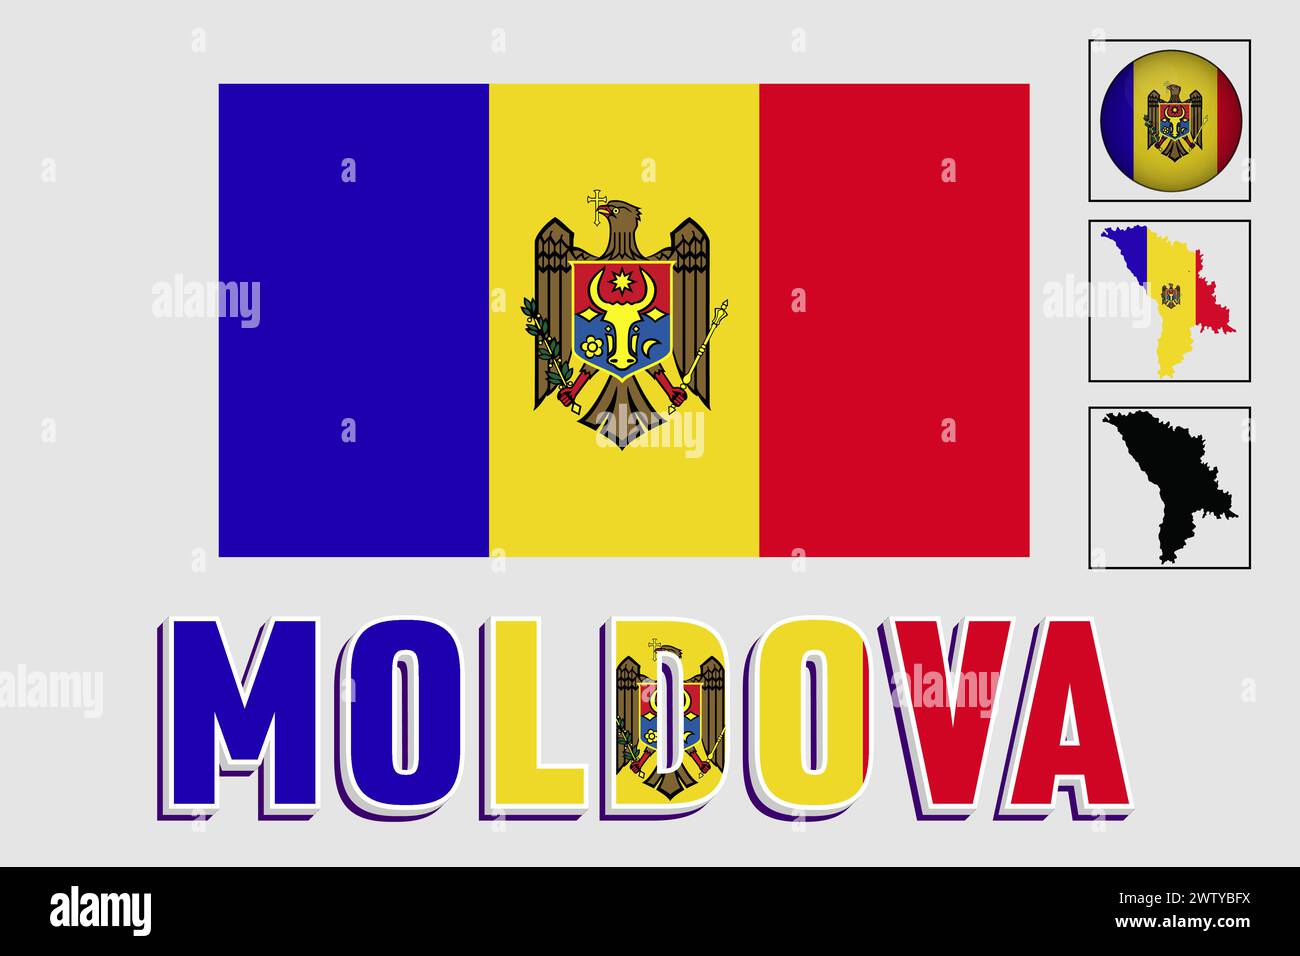 Moldova flag and map in a vector graphic Stock Vector